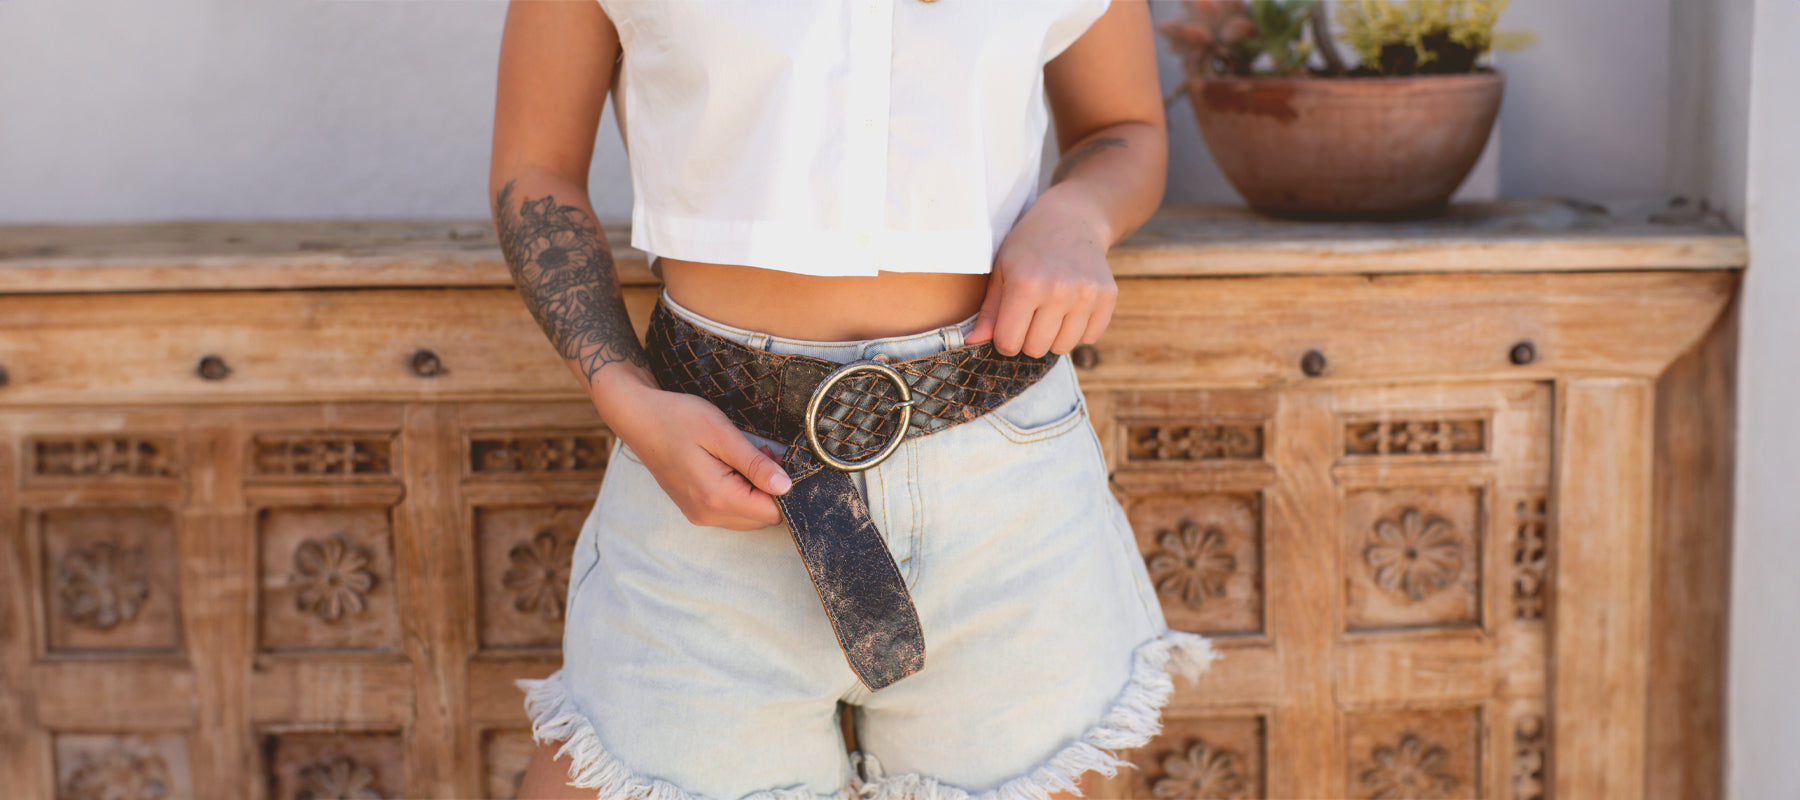 A person in a white crop top and denim shorts, showcasing a tattooed arm and holding a stylish belt, standing in front of a carved wooden cabinet.